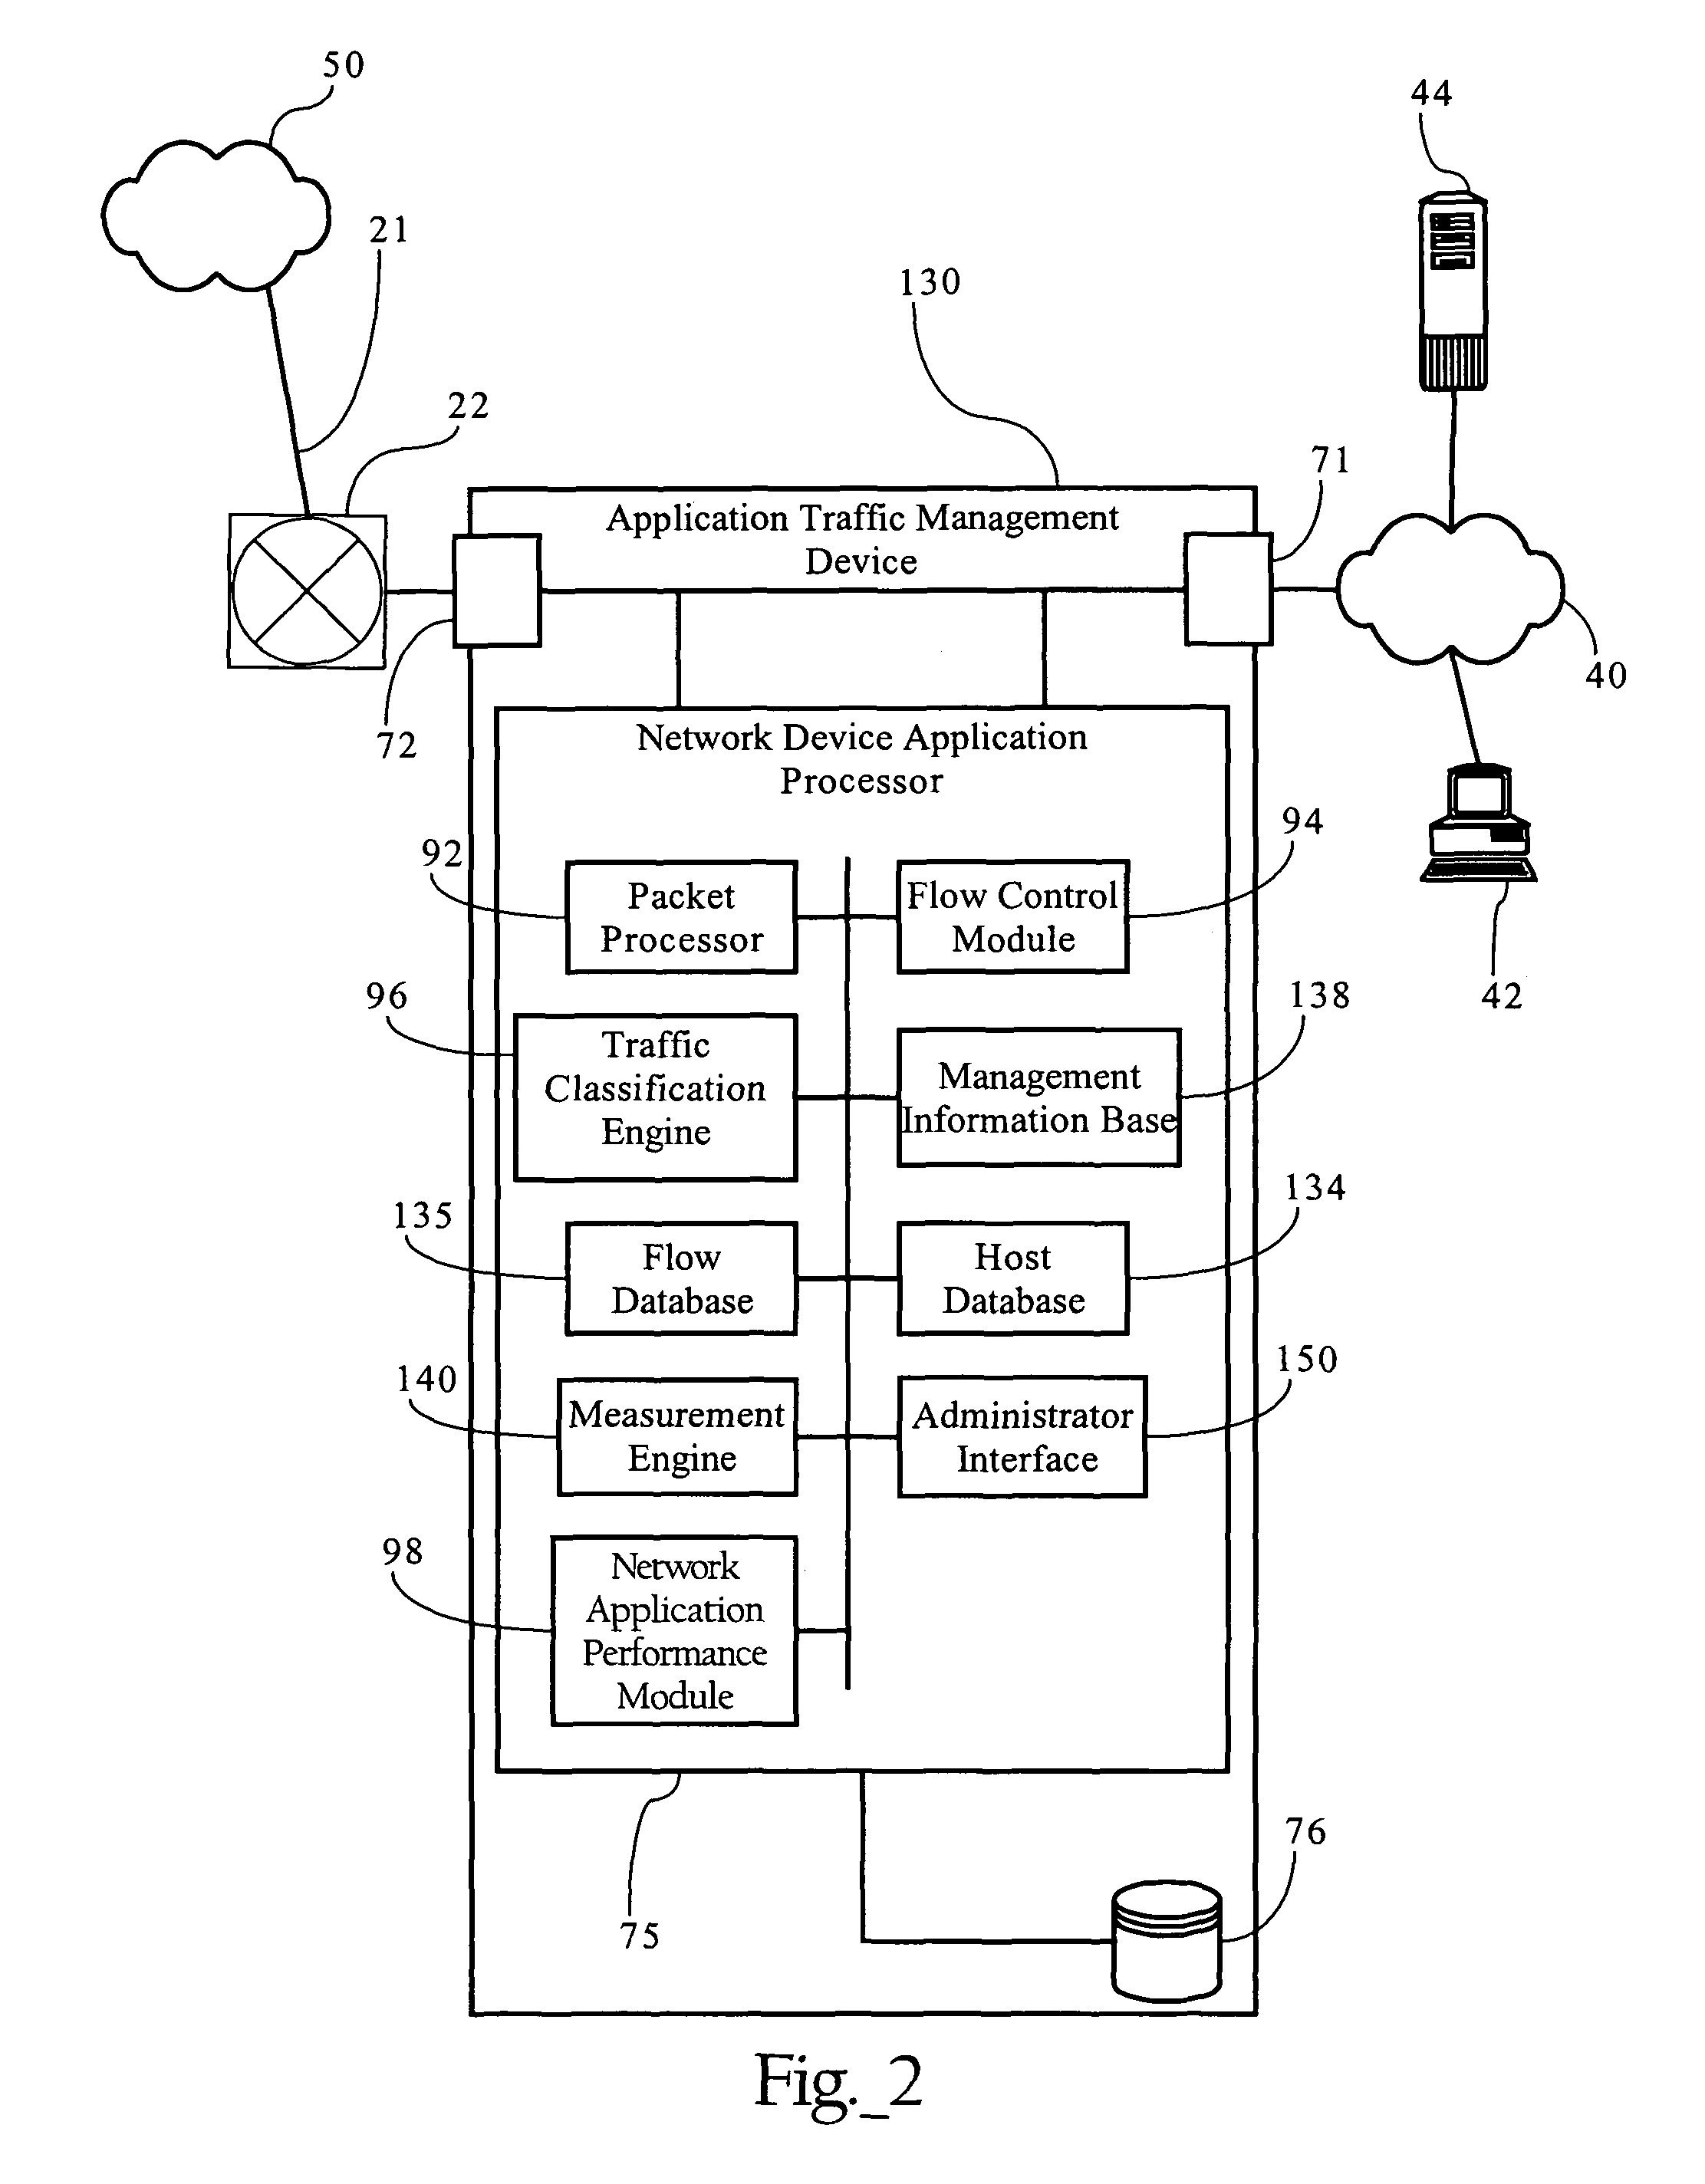 Adaptive correlation of service level agreement and network application performance